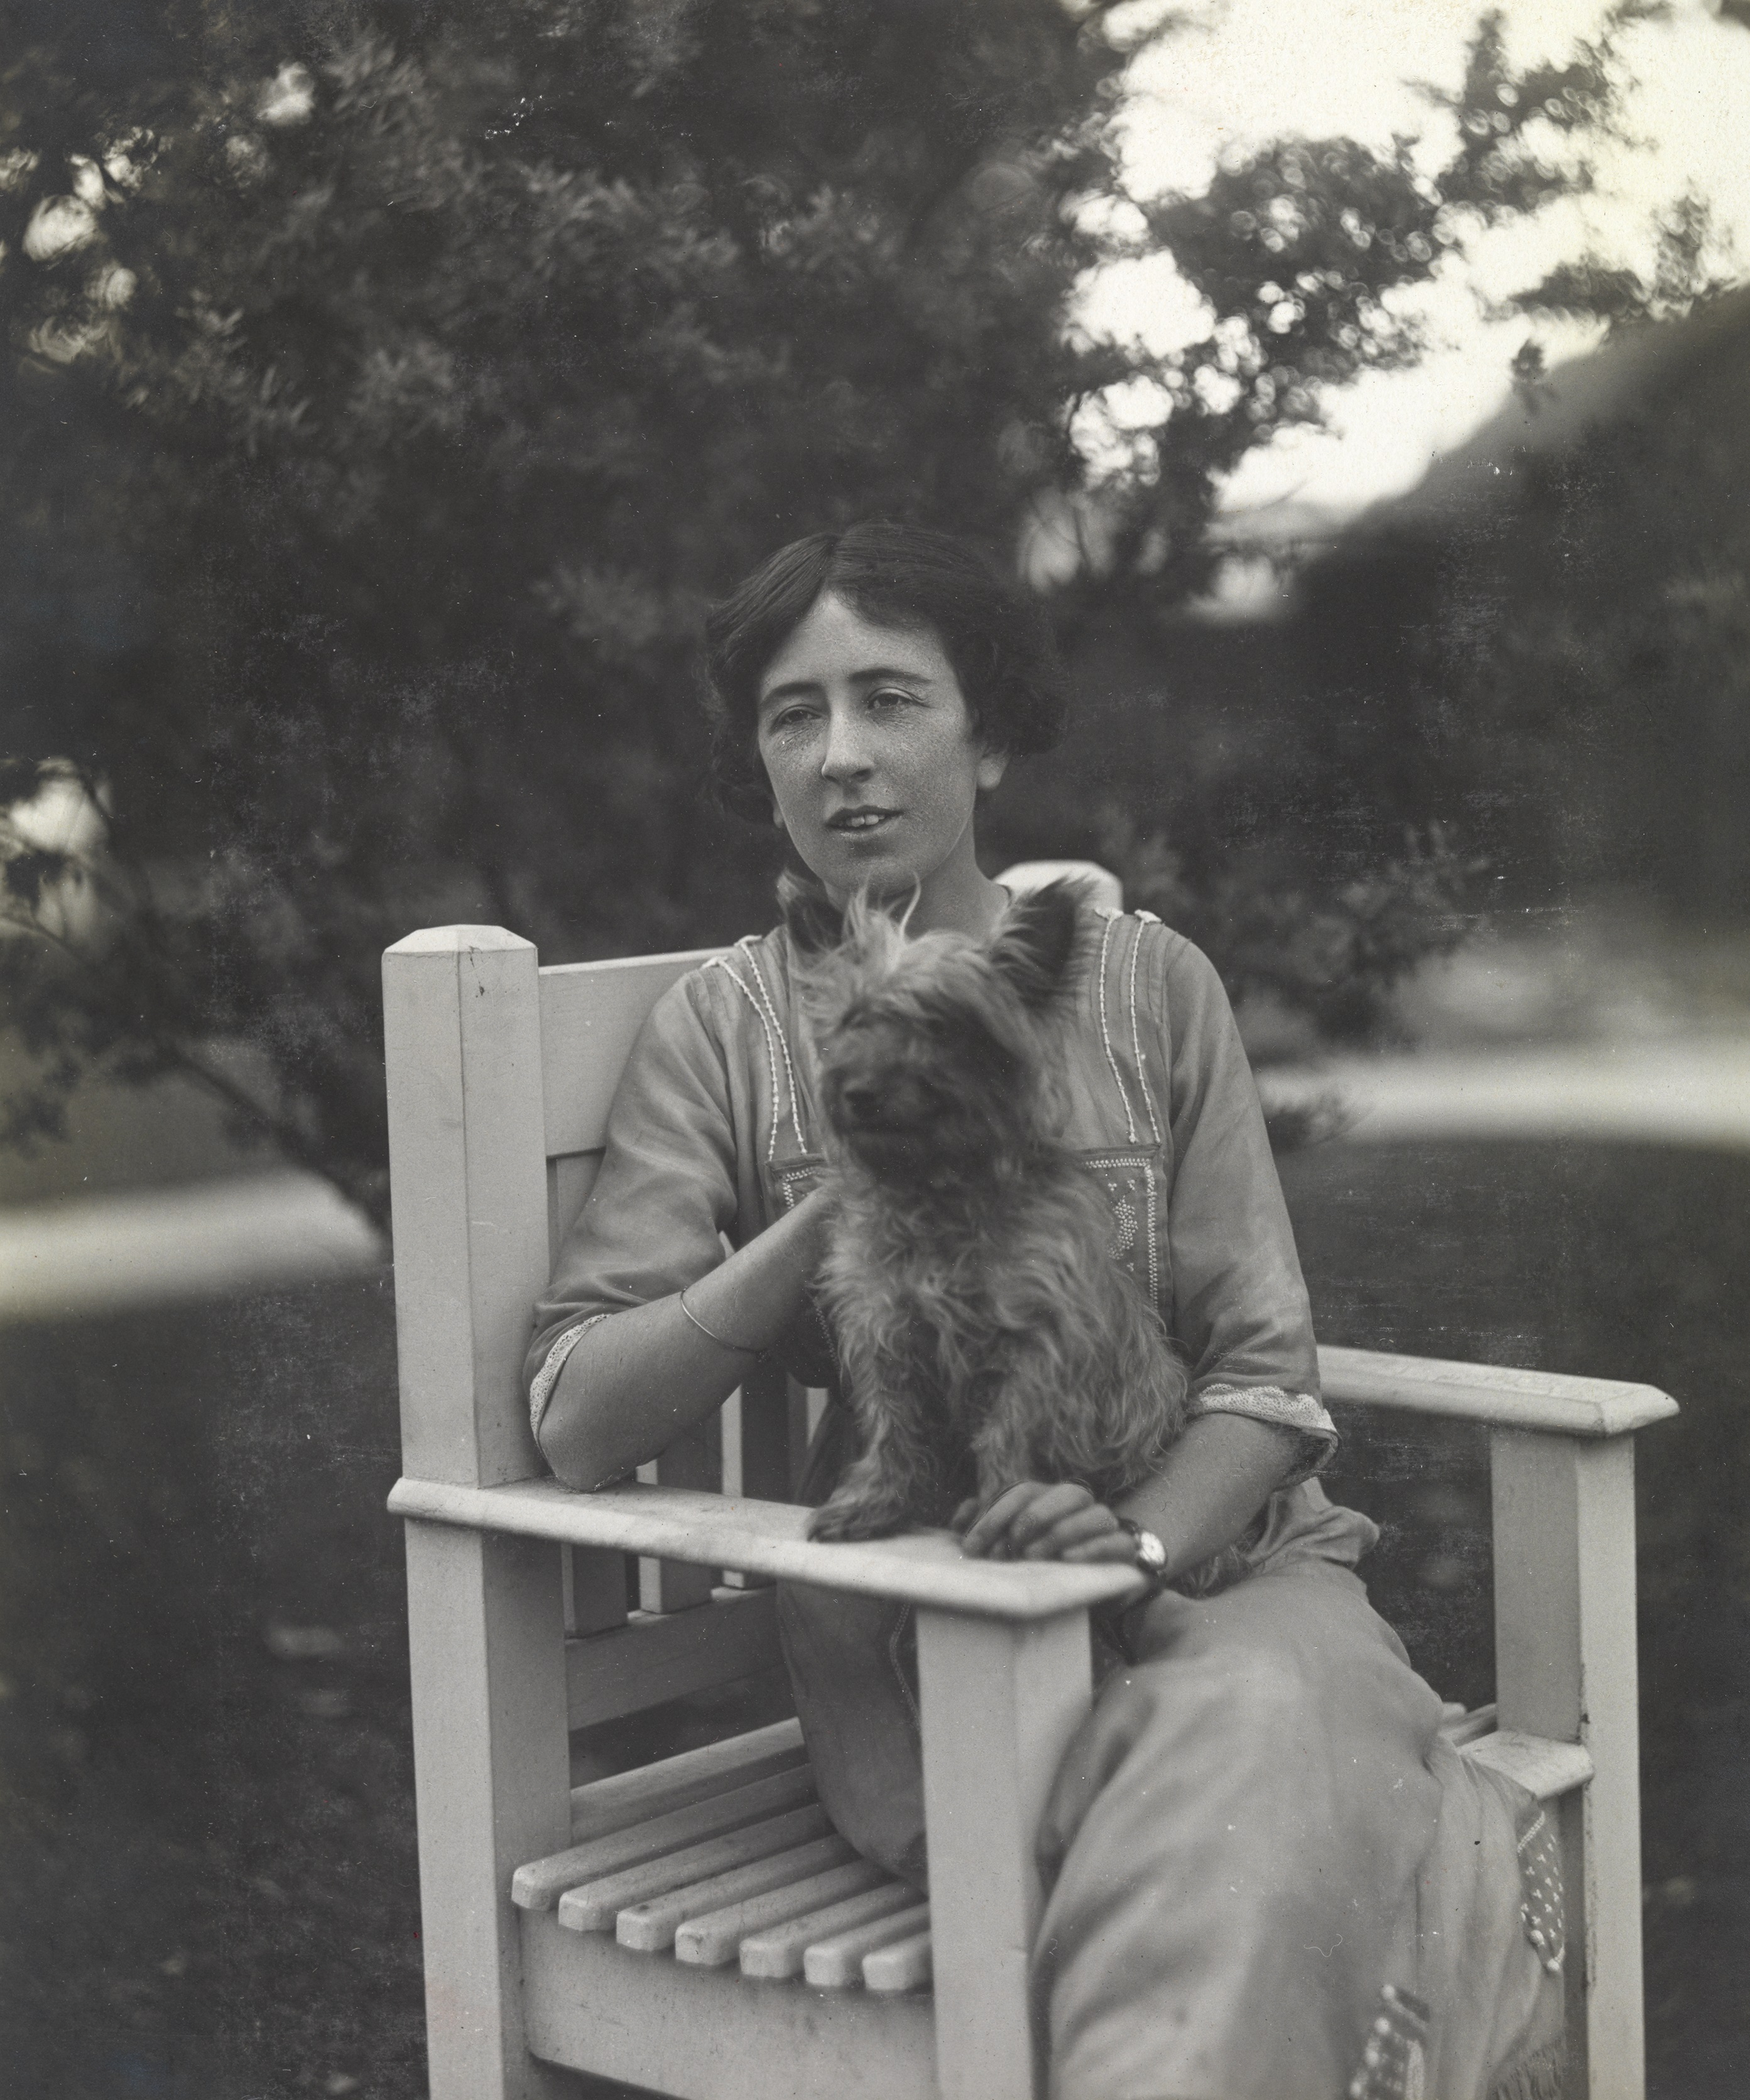 Woman and terrier dog sitting on garden chair both with gaze averted t their right  . terrier dog on her lap with front paws on arm of chair 